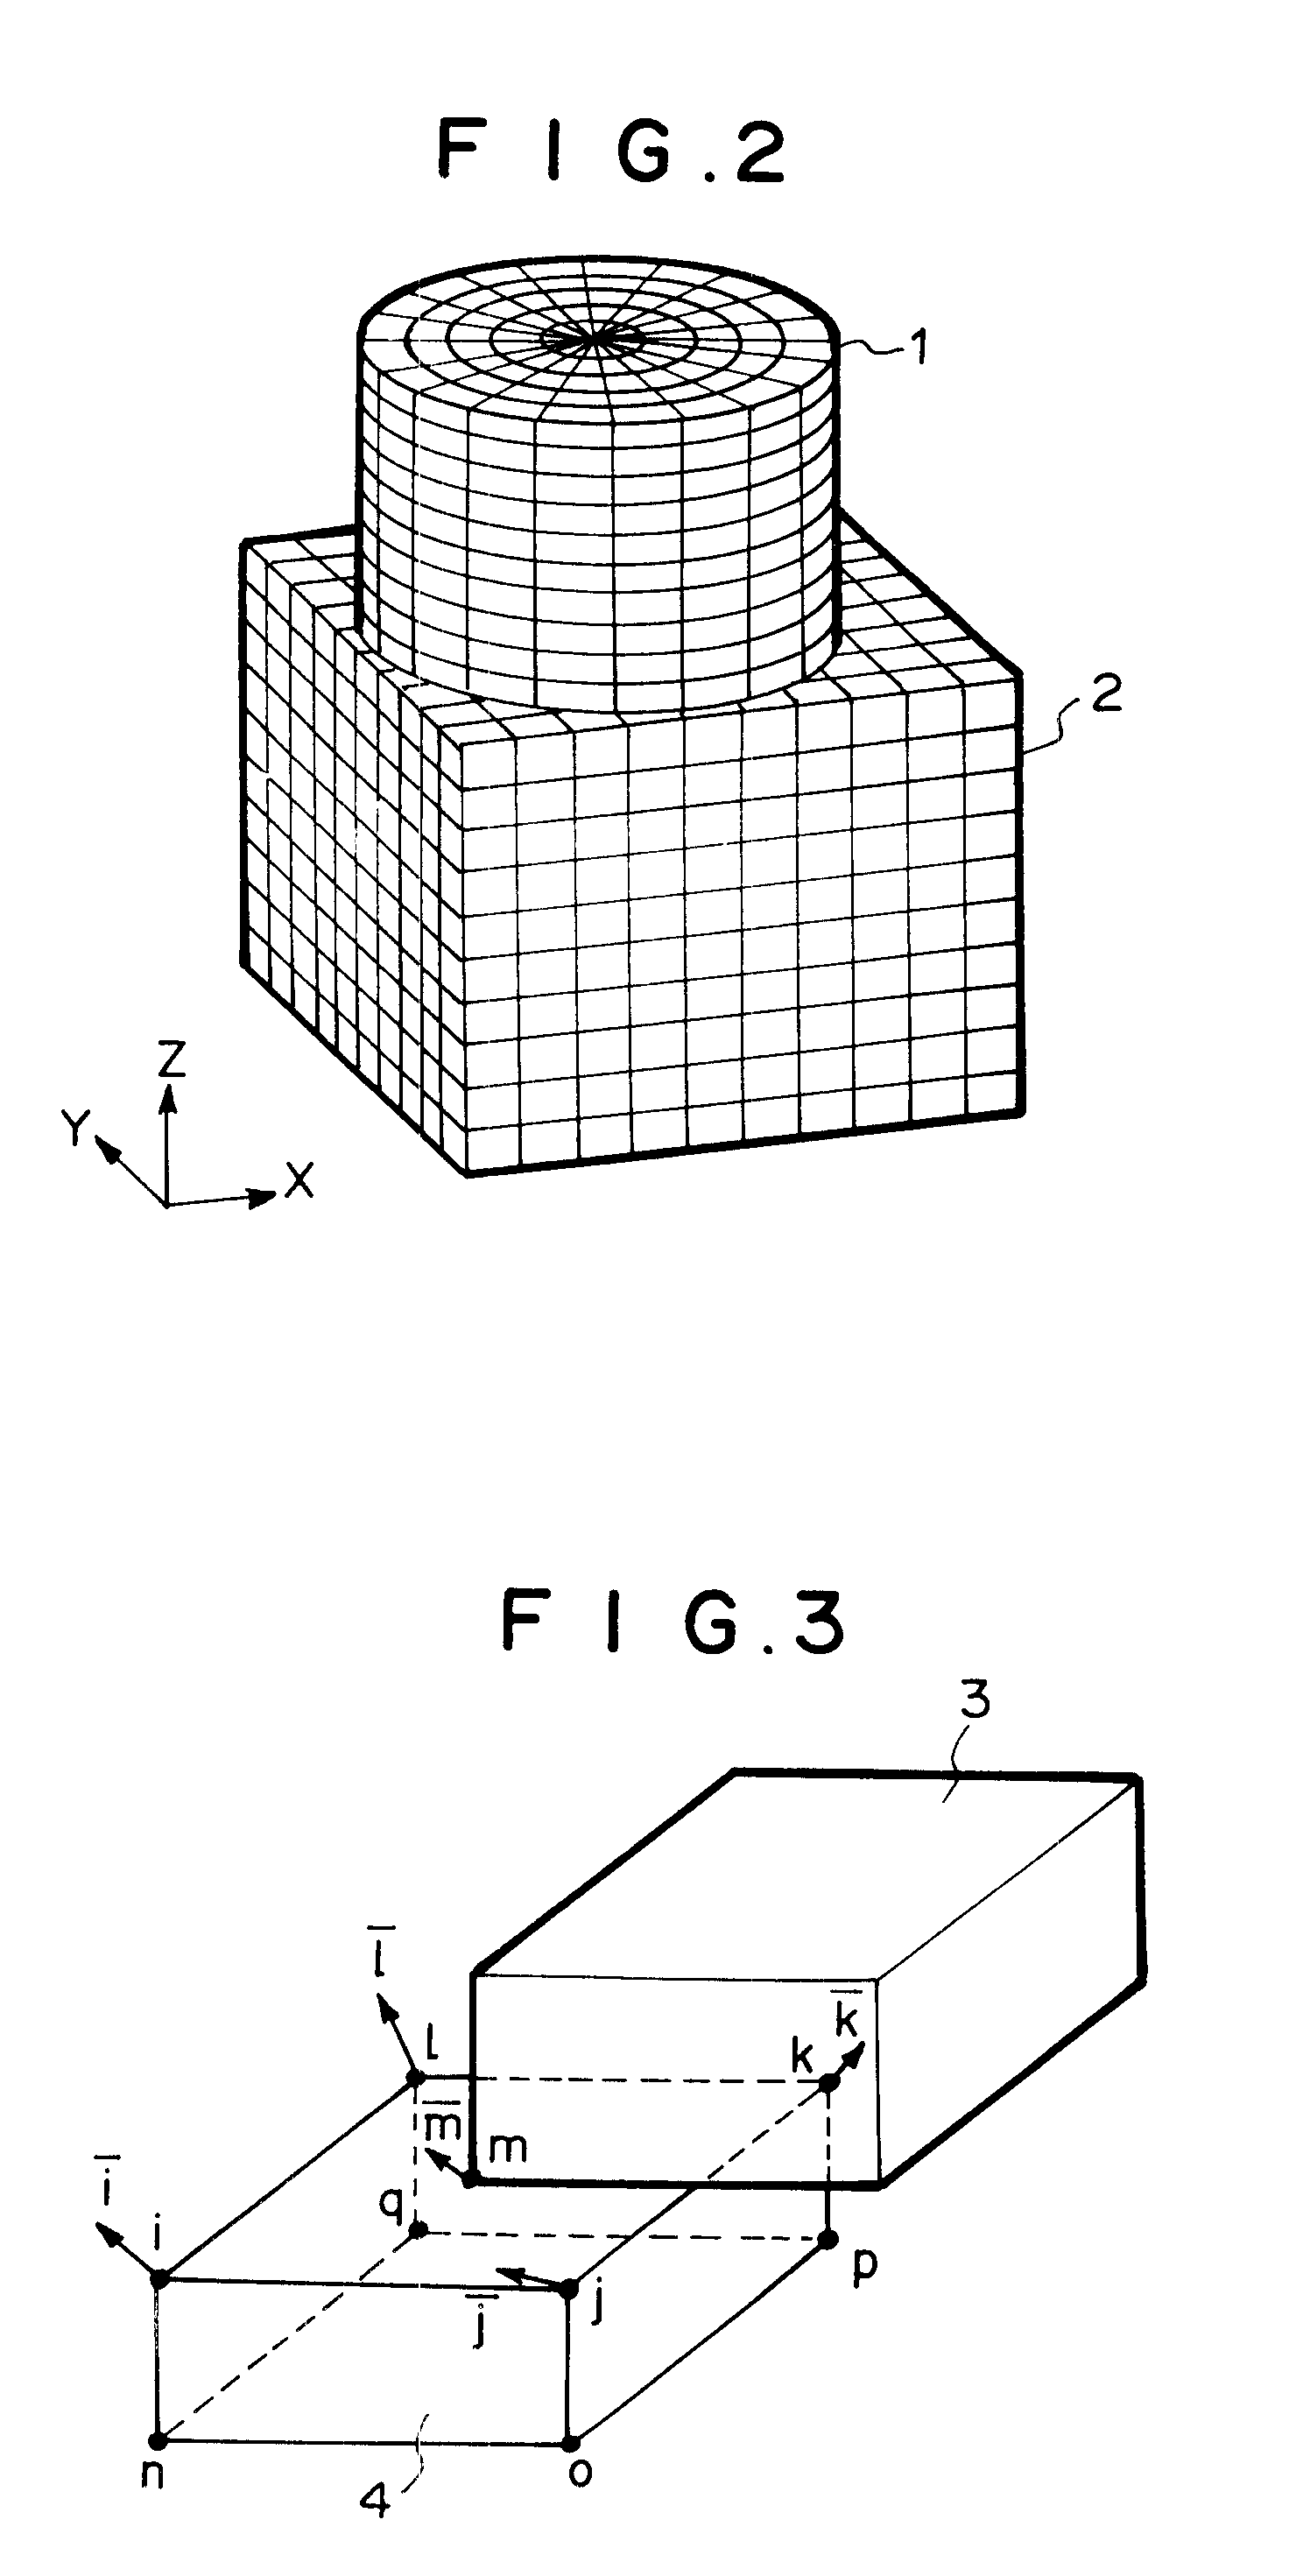 Method, apparatus and computer program product for forming data to be analyzed by finite element method and calculation method based on finite element method